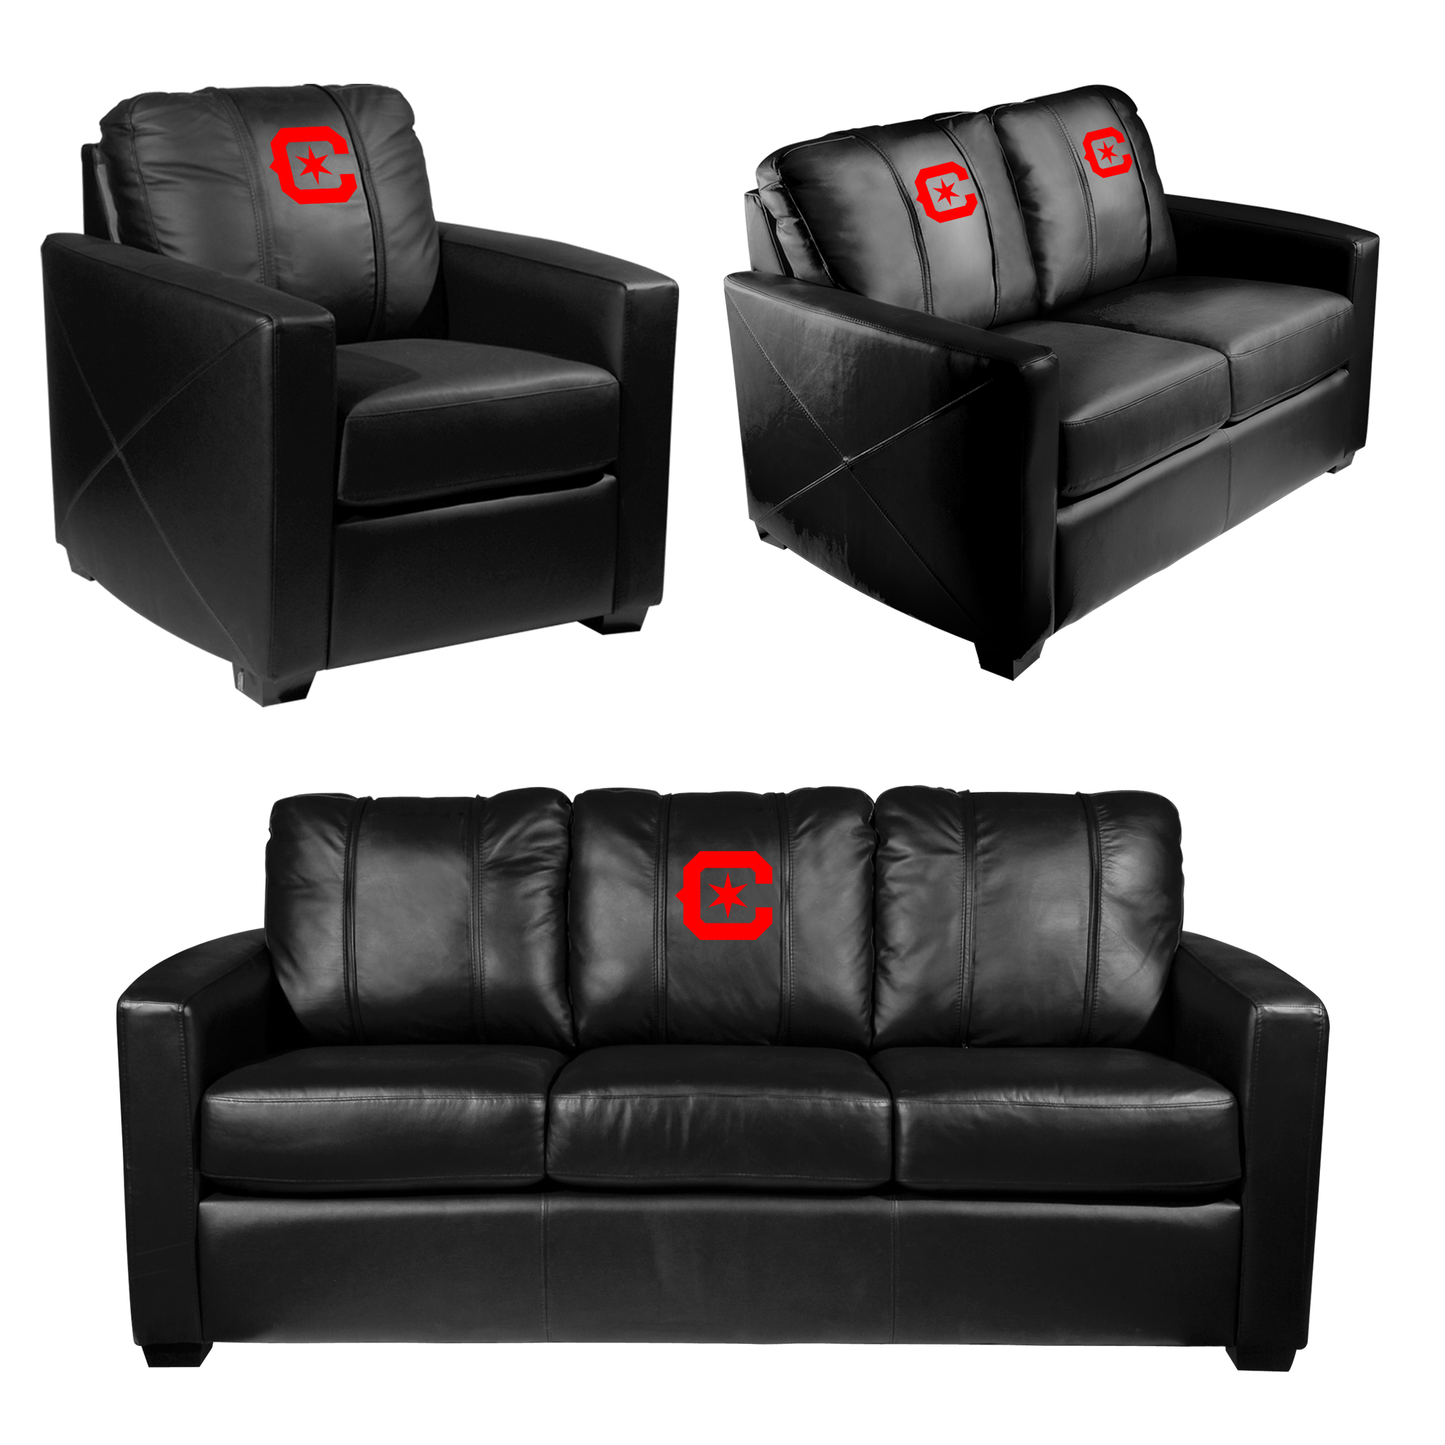 Silver Club Chair with Chicago Fire FC Secondary Logo